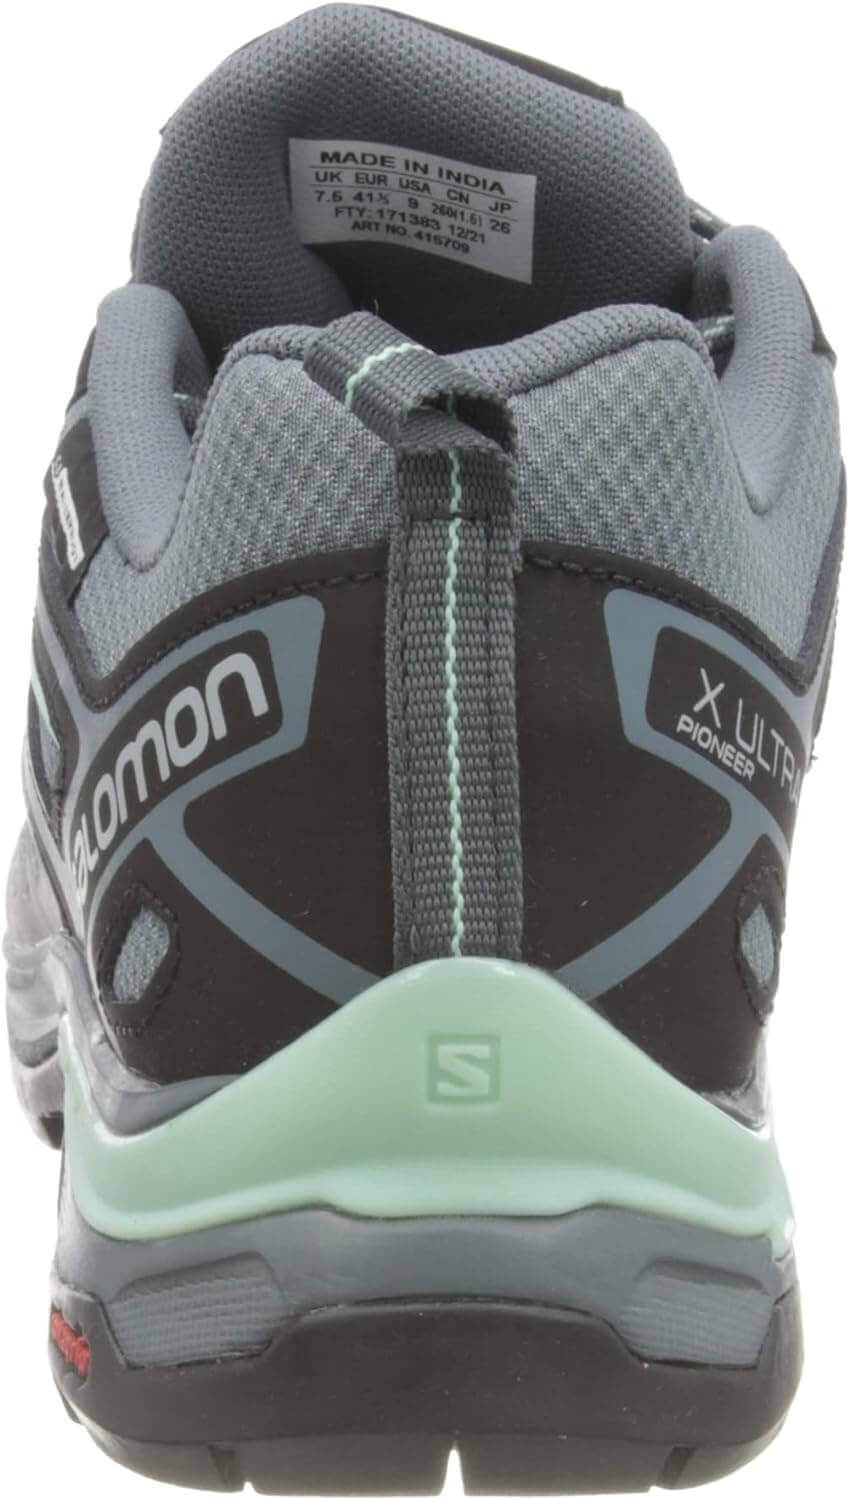 Shop The Latest >Salomon Women's X Ultra Pioneer Waterproof Hiking Shoes > *Only $112.06*> From The Top Brand > *Salomonl* > Shop Now and Get Free Shipping On Orders Over $45.00 >*Shop Earth Foot*